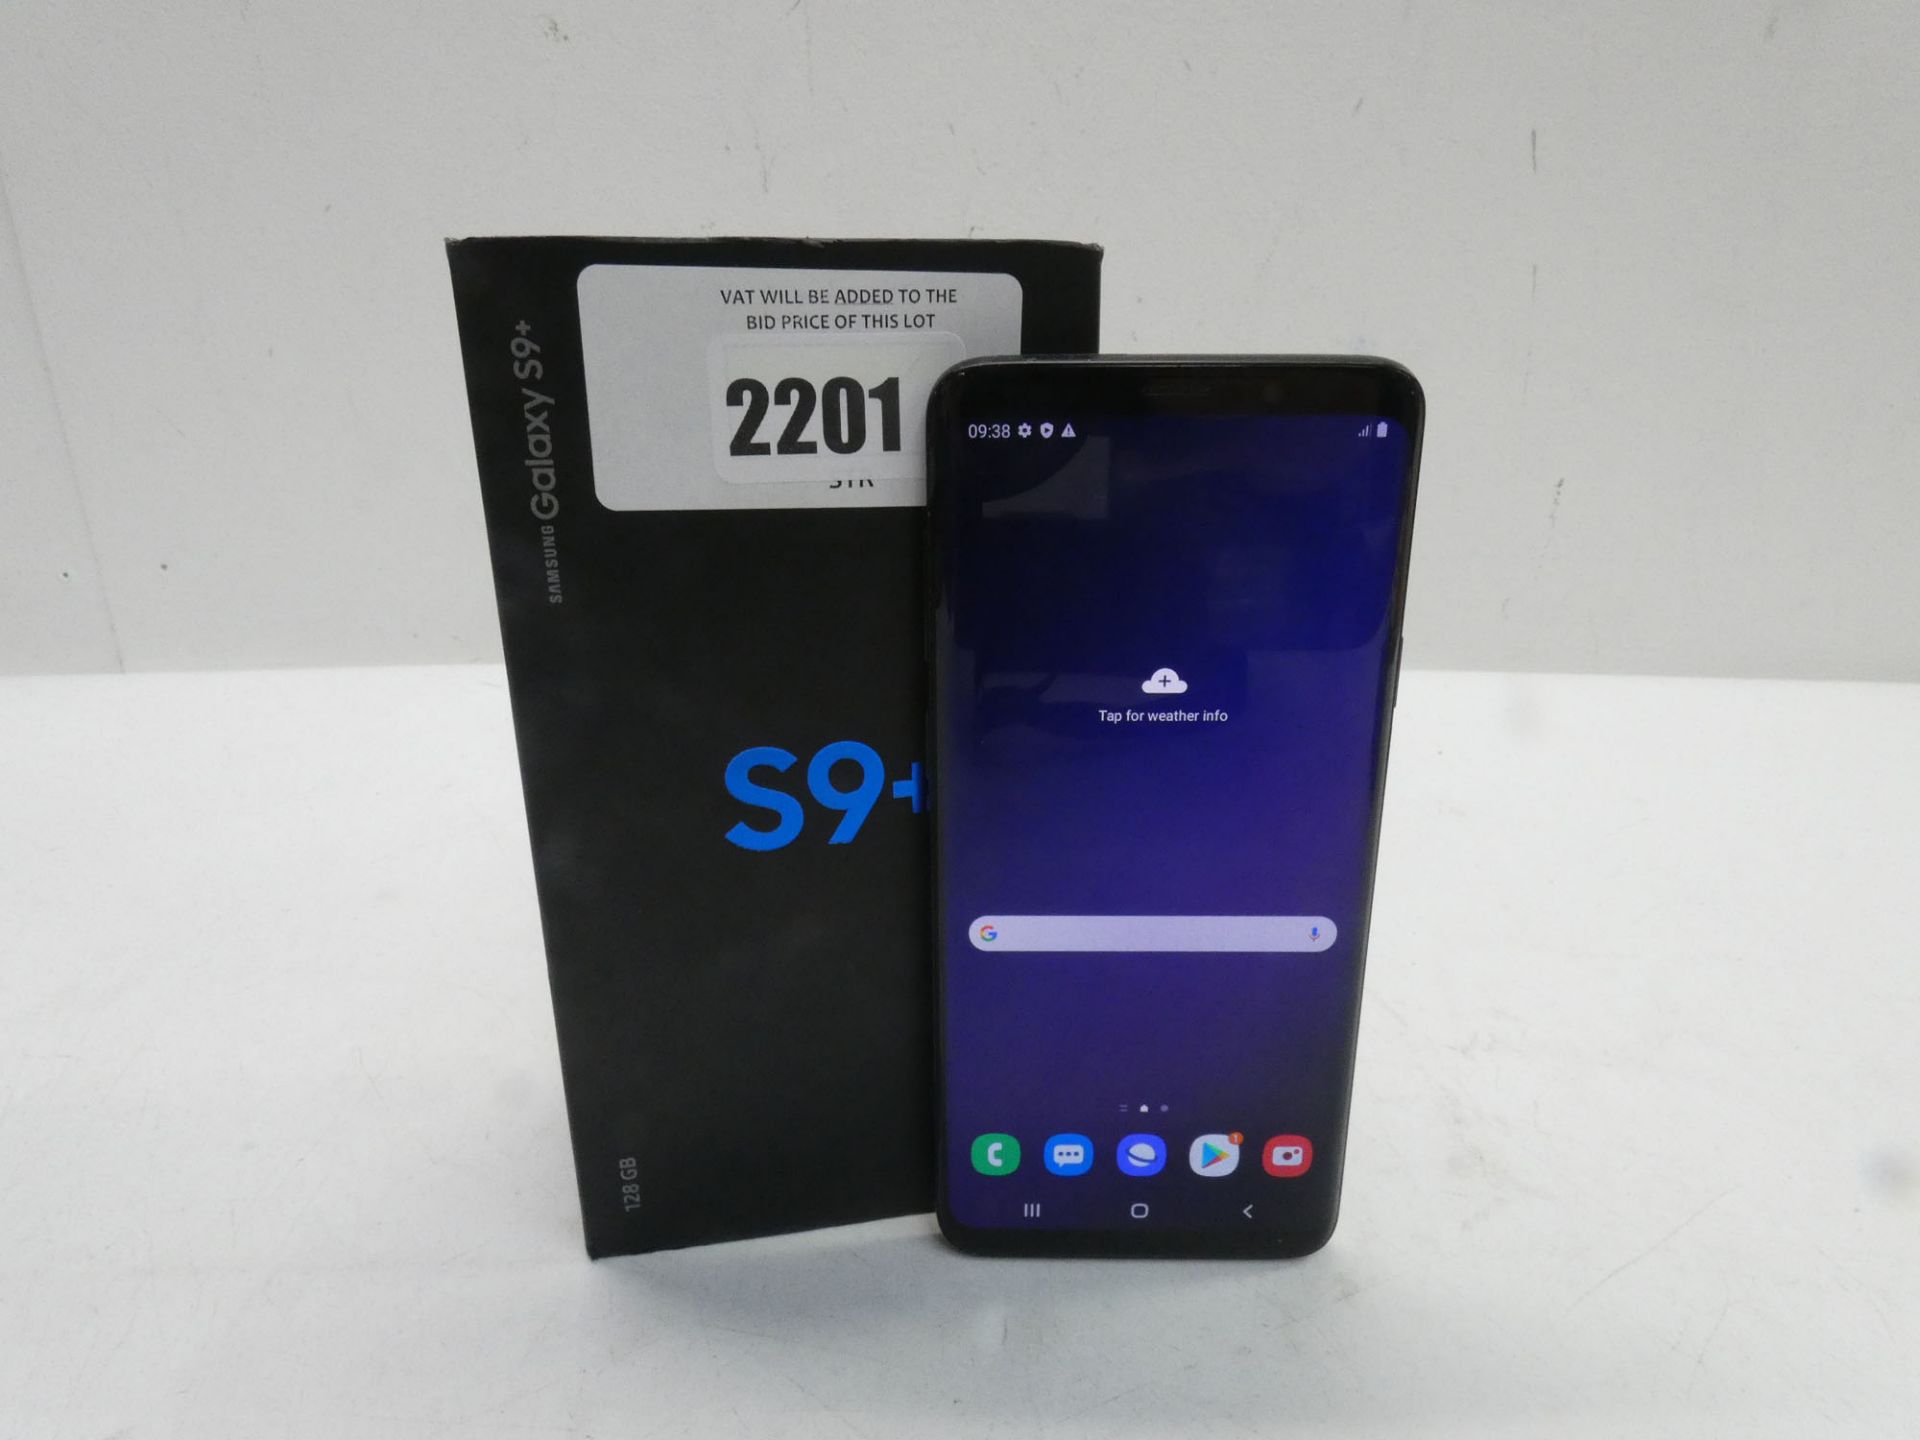 Samsung Galaxy S9+ 128GB Midnight Black smartphone with box and charger